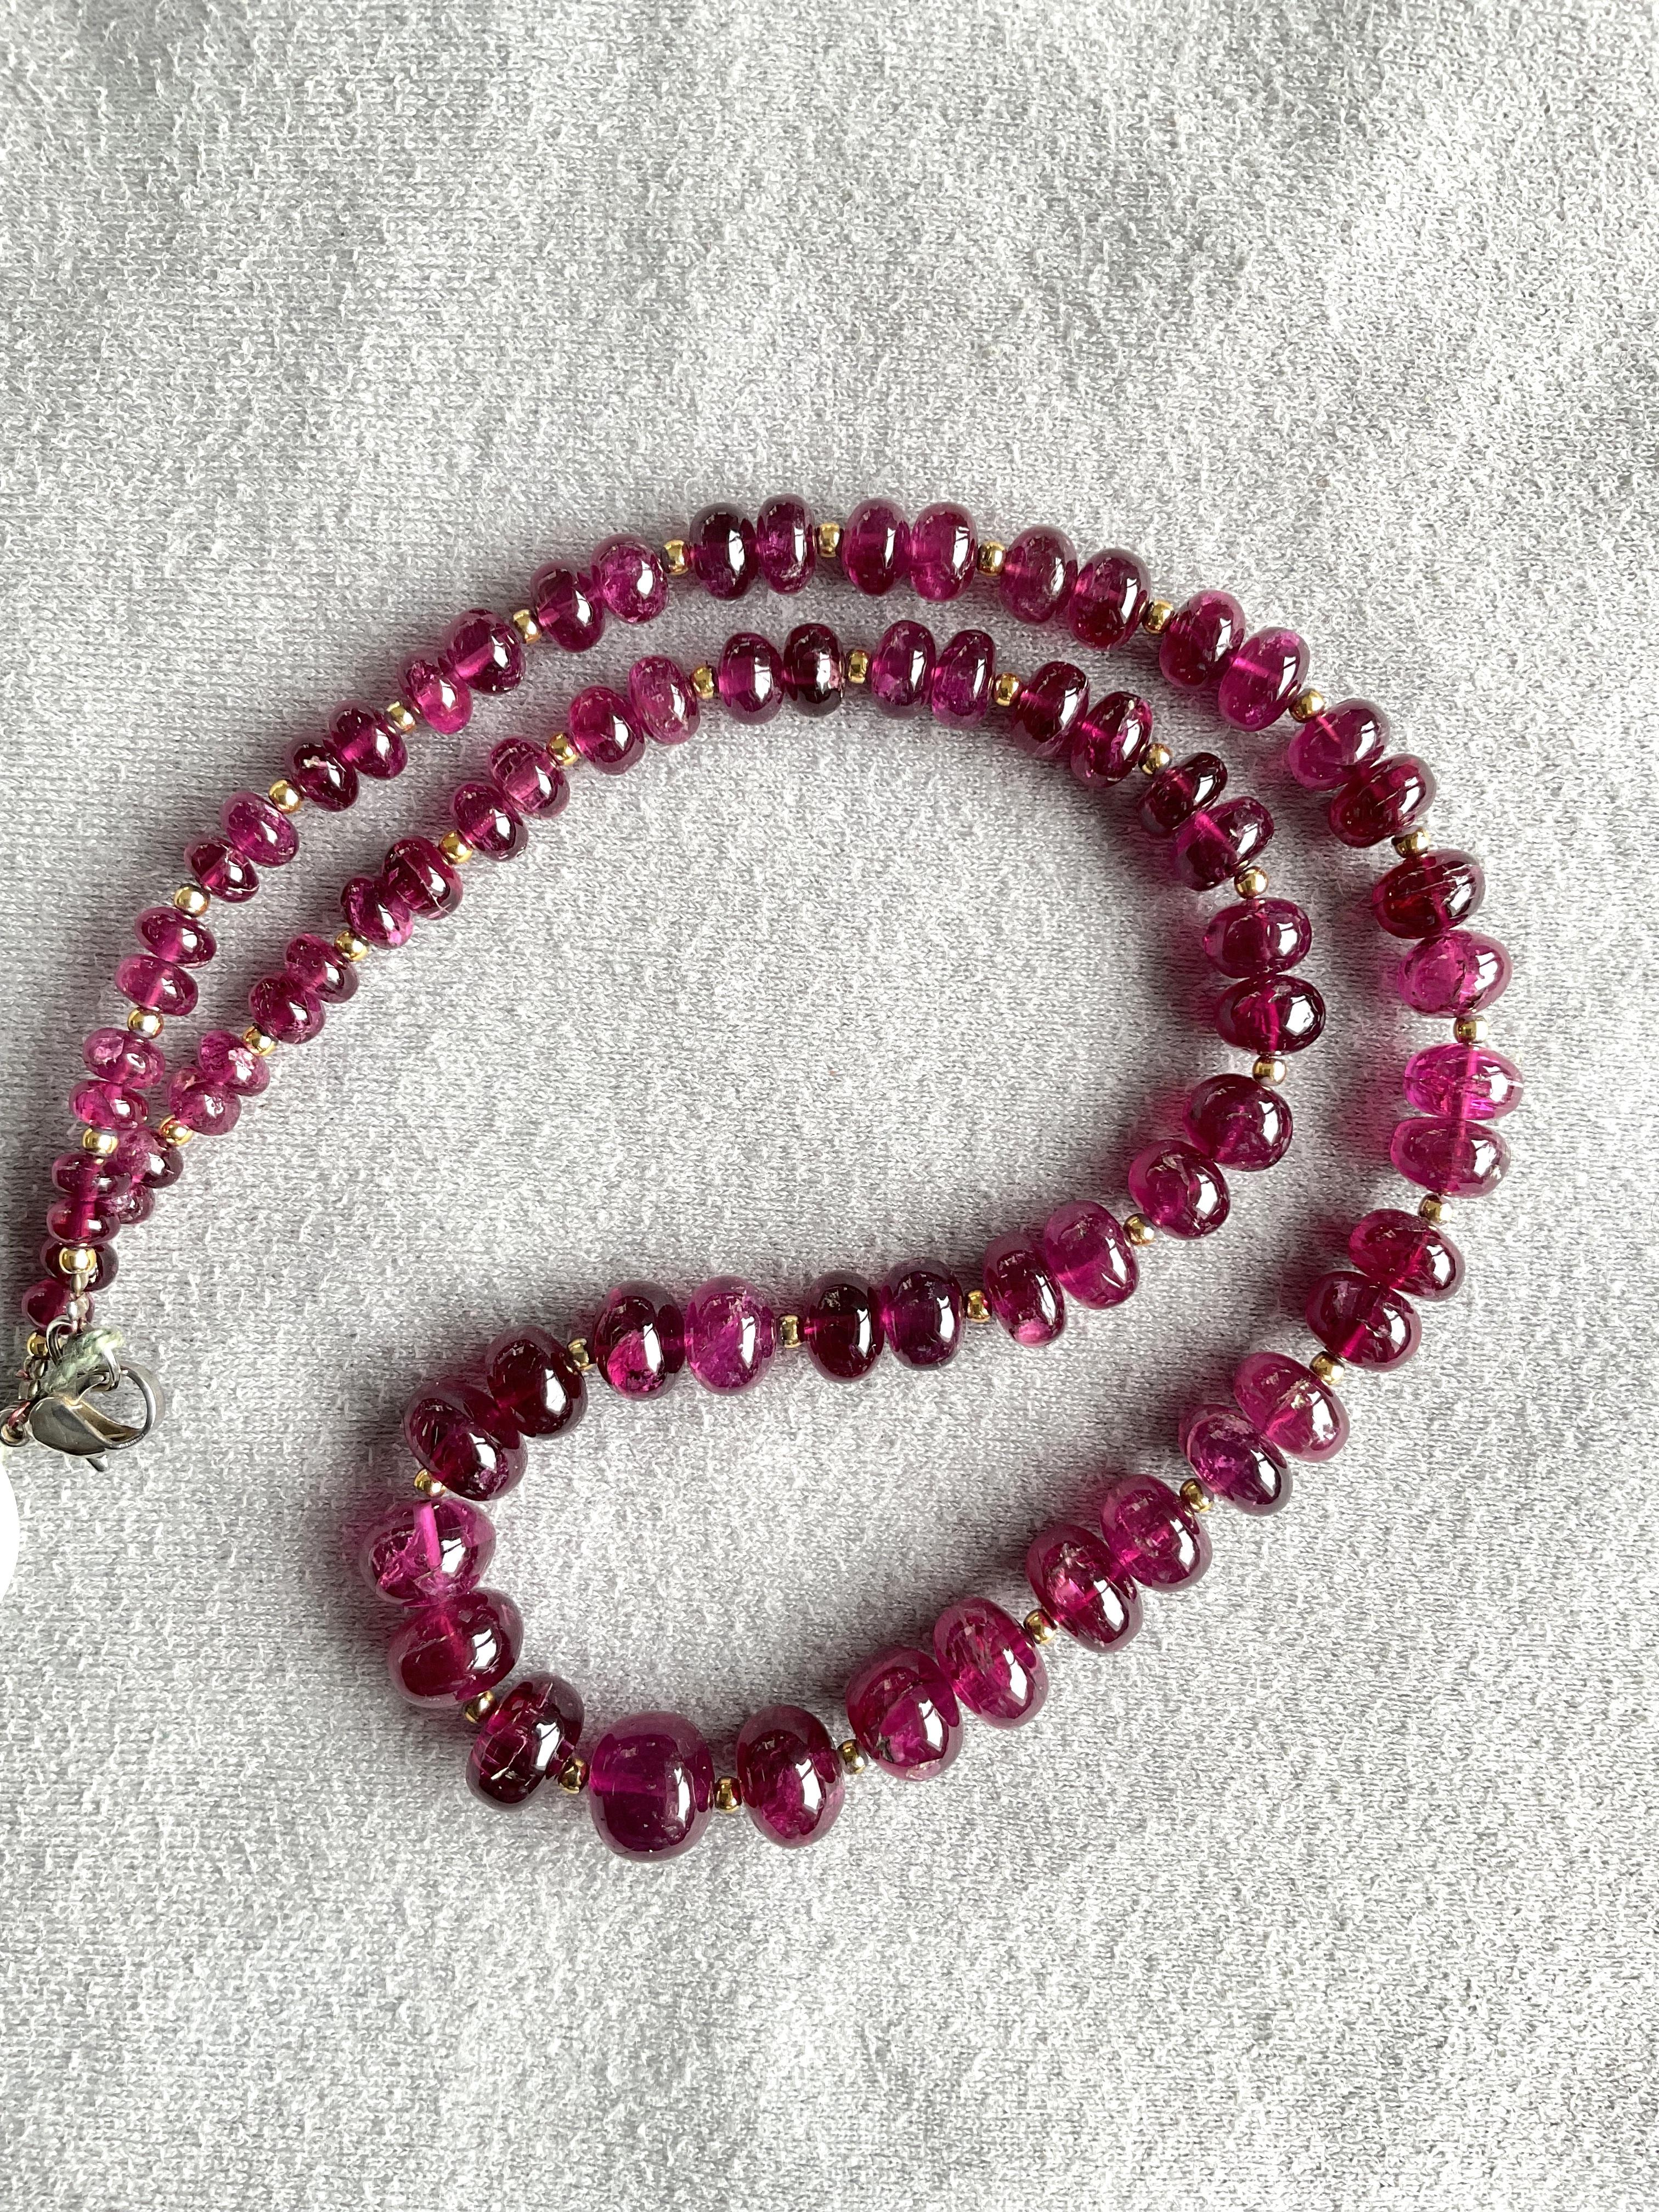 163.00 Carats Rubellite Tourmaline Necklace Fine Jewelry Natural Gemstone Beads For Sale 2